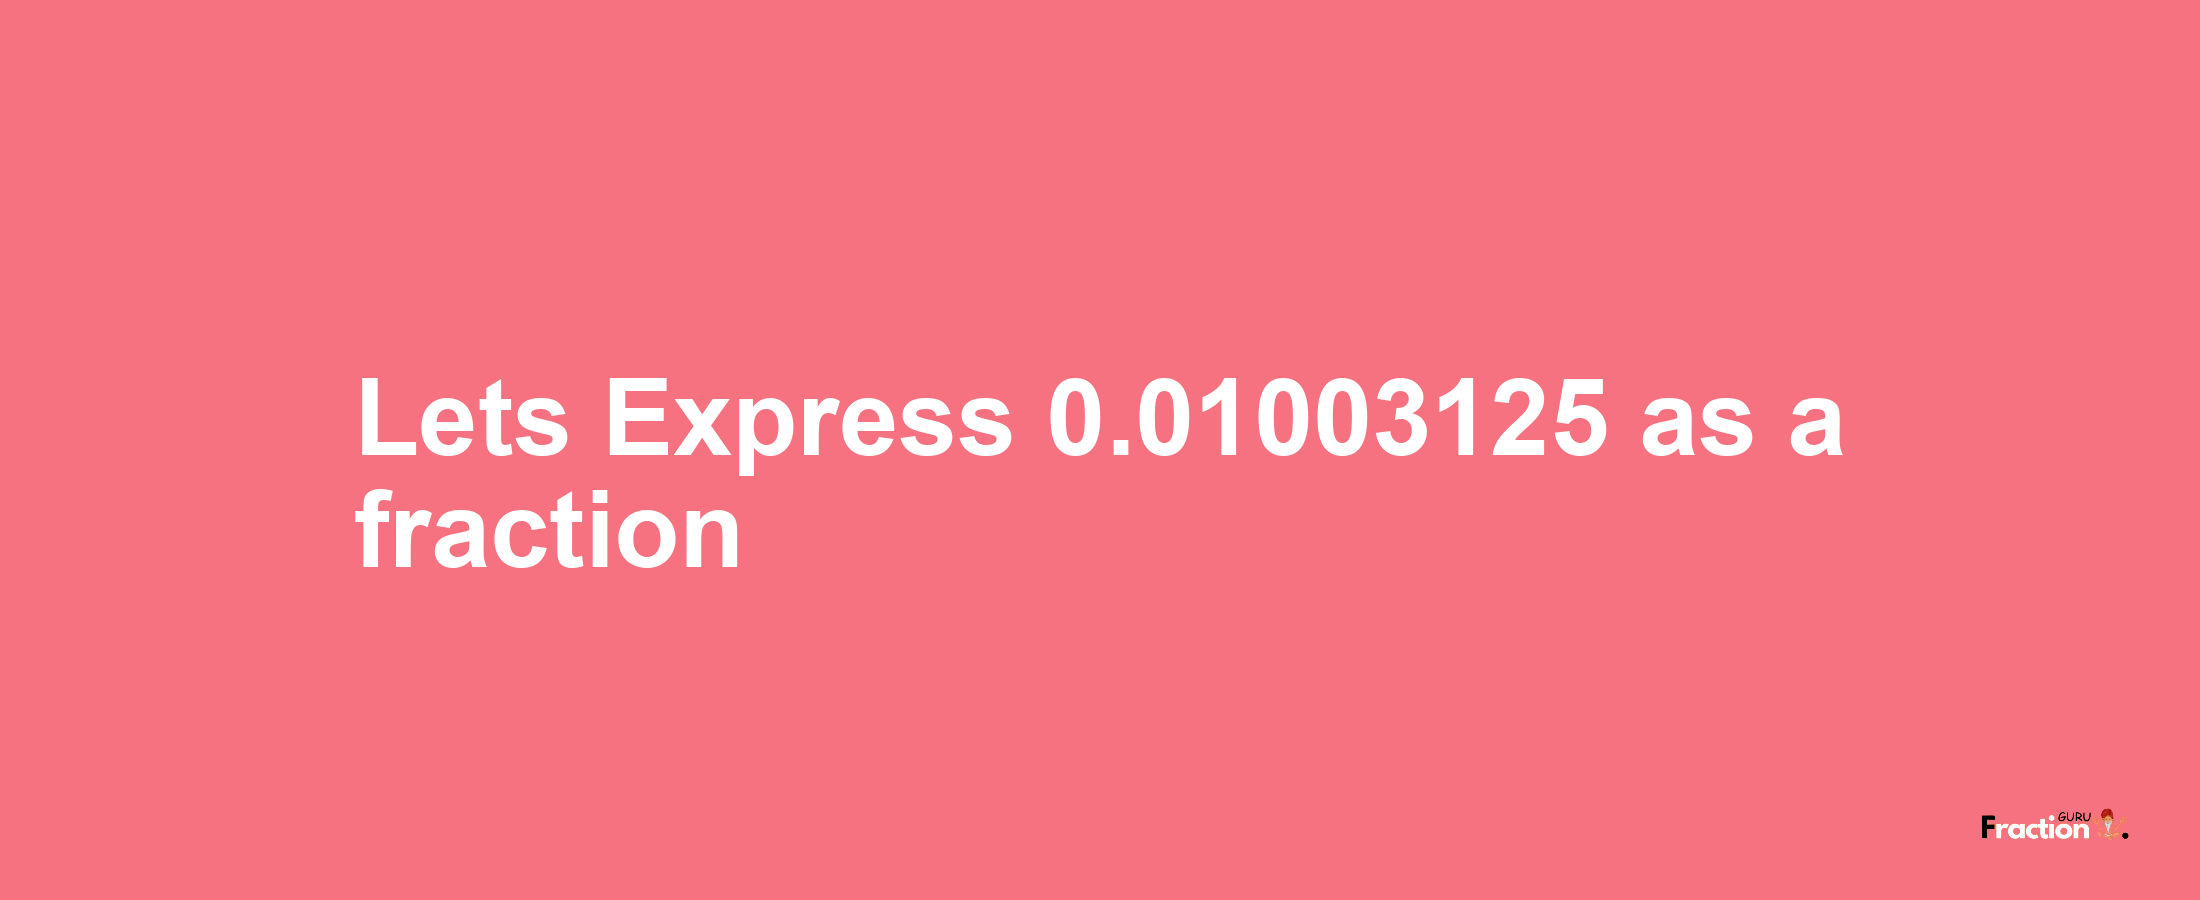 Lets Express 0.01003125 as afraction